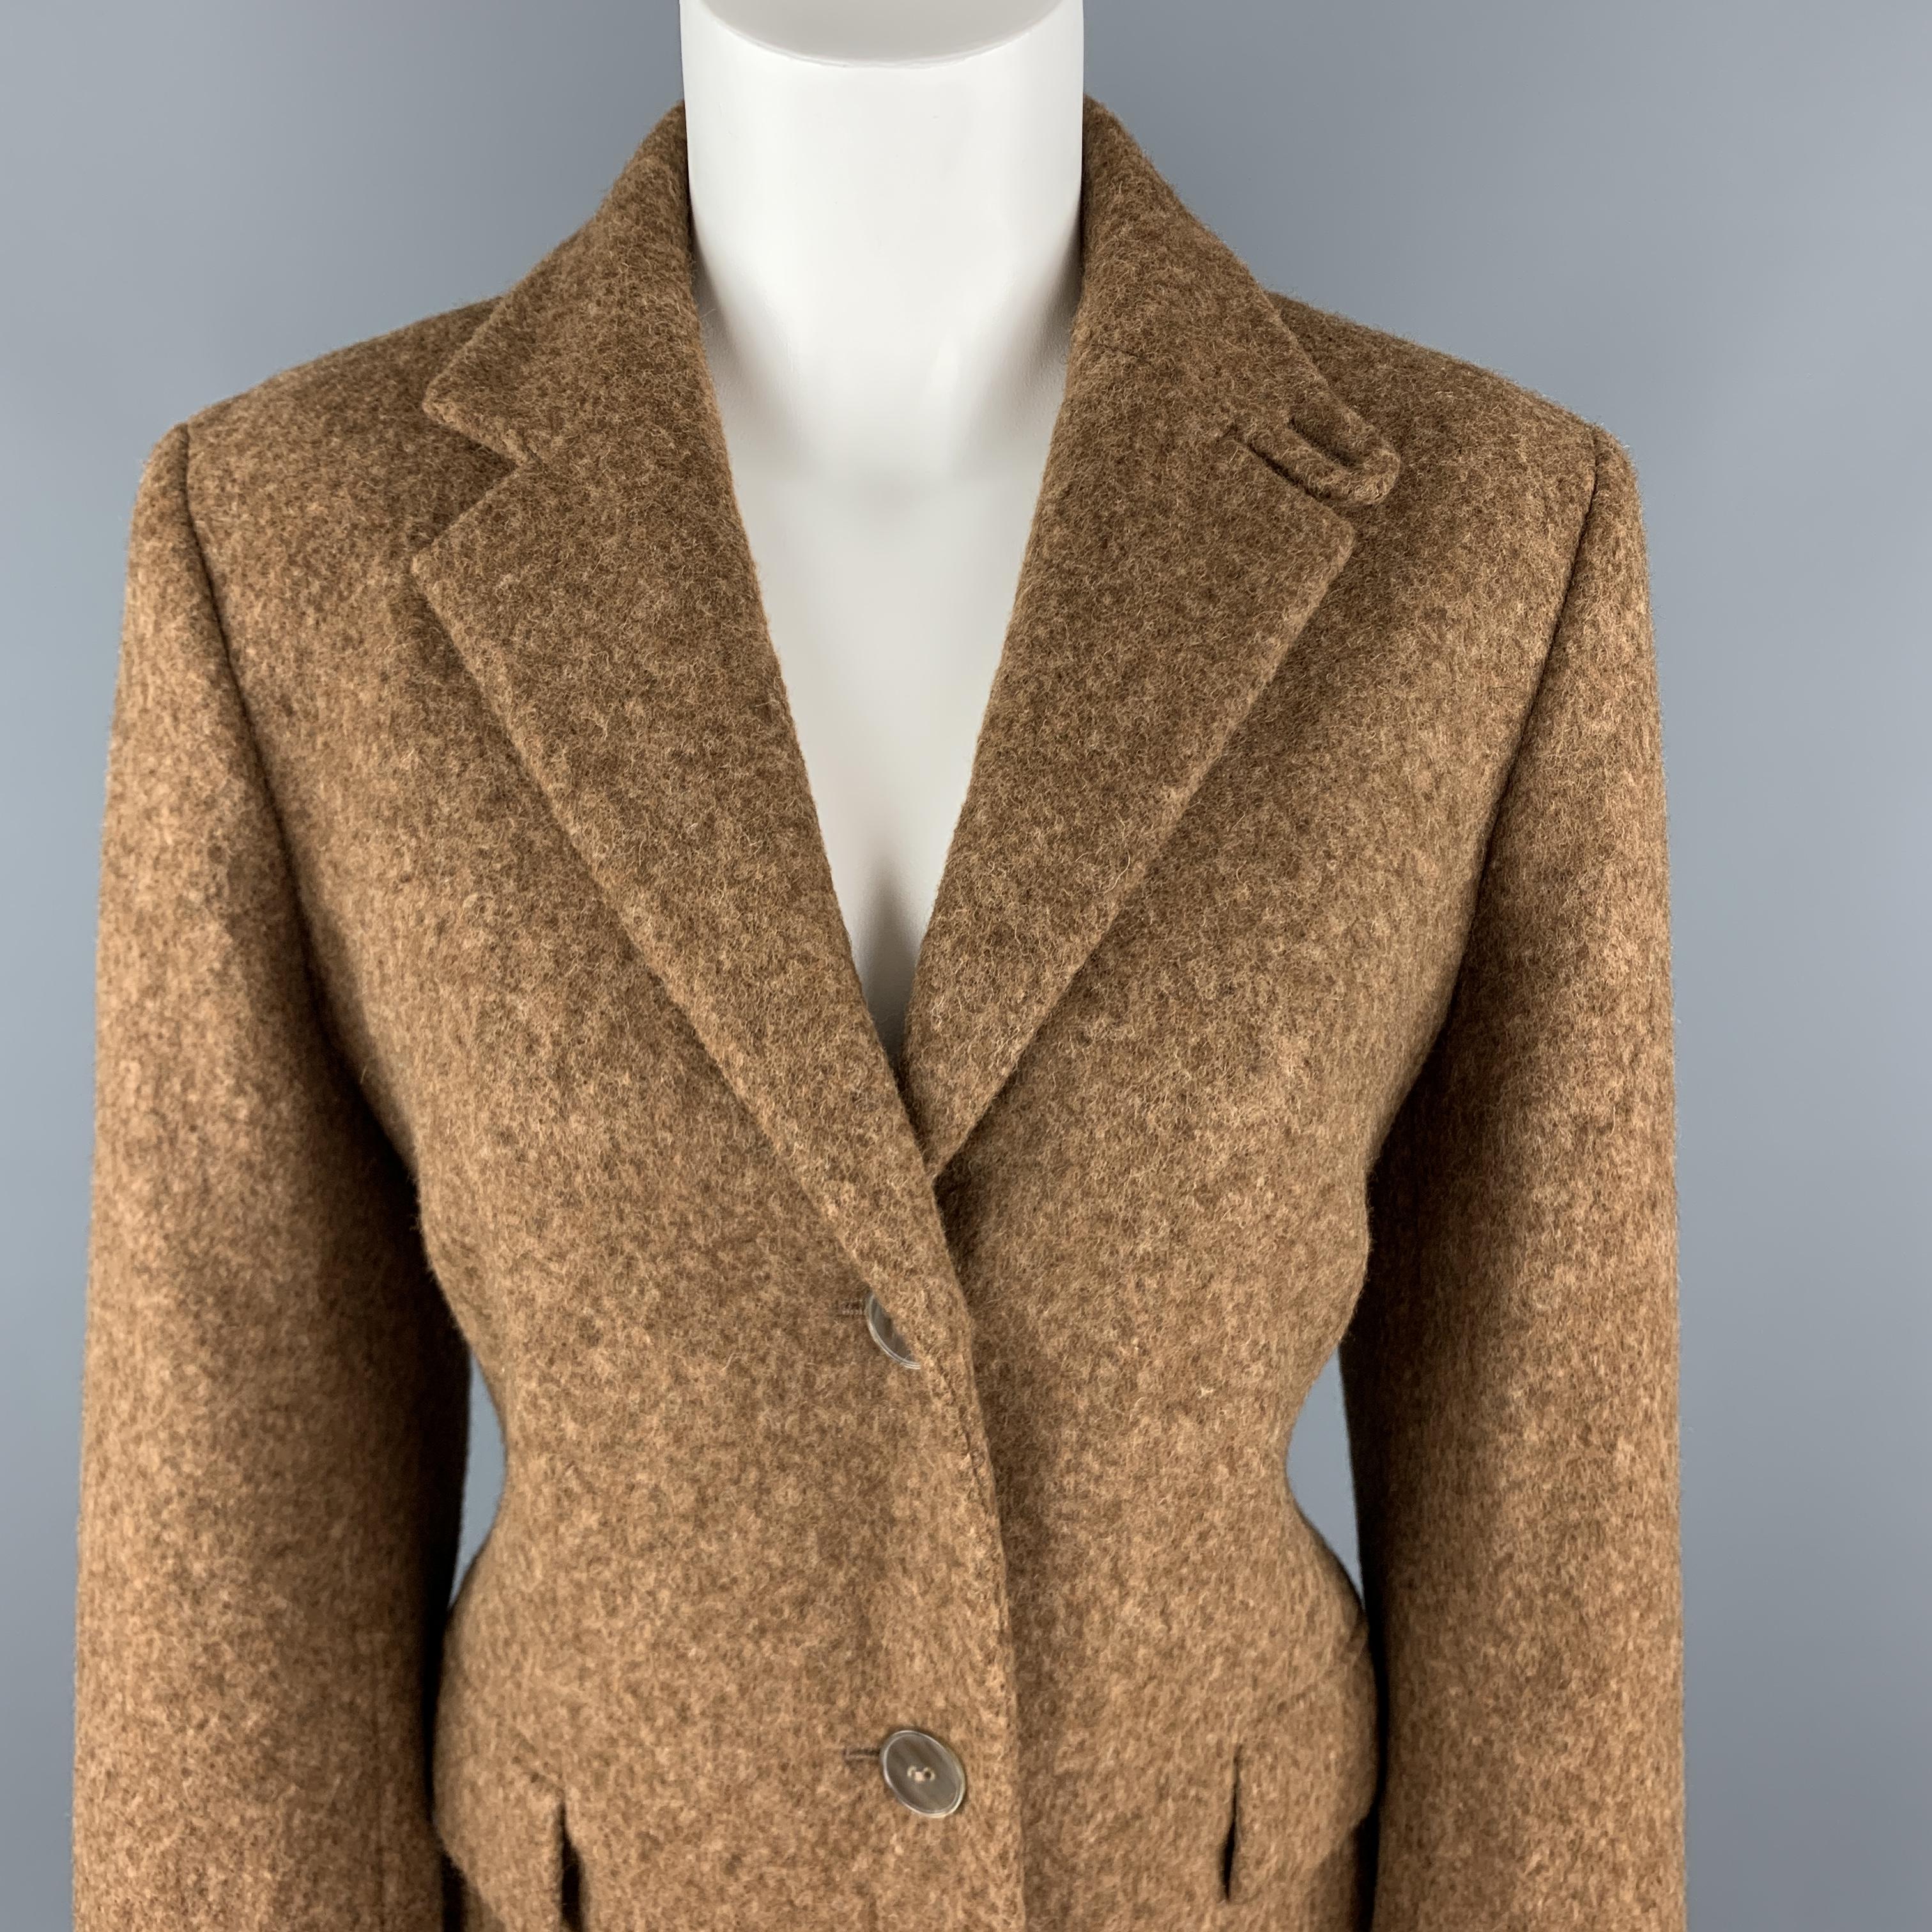 LUCIANO BARBERA coat comes in heathered tan alpaca blend fabric with a tab collar notch lapel, flap pockets, and single breasted button front. Made in Italy.

Excellent Pre-Owned Condition.
Marked: IT 44

Measurements:

Shoulder: 16 in.
Bust: 40